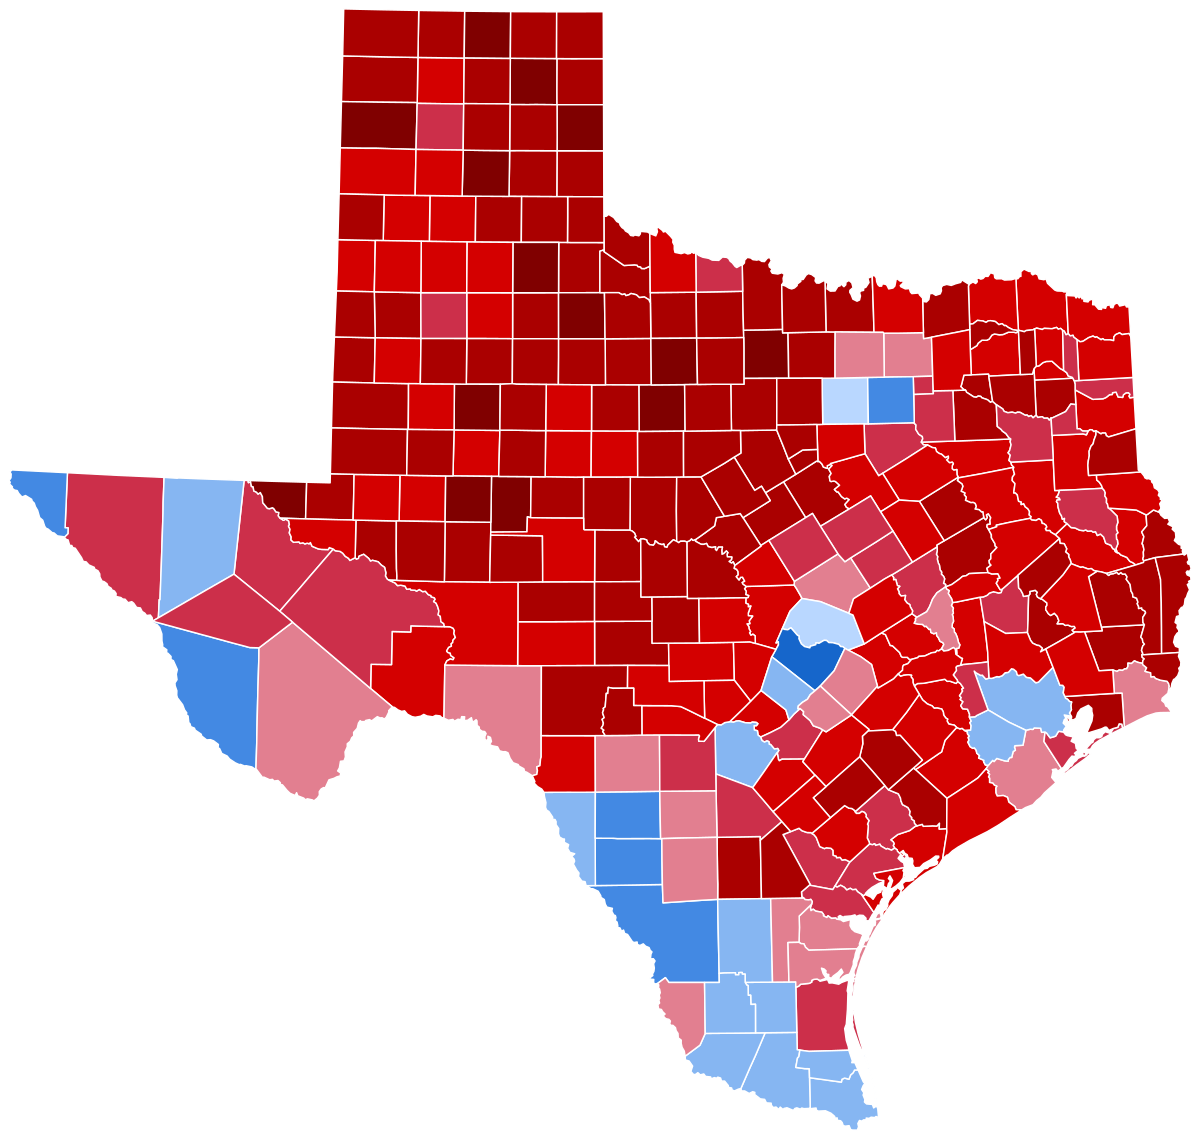 2020 United States presidential election in Texas - Wikipedia